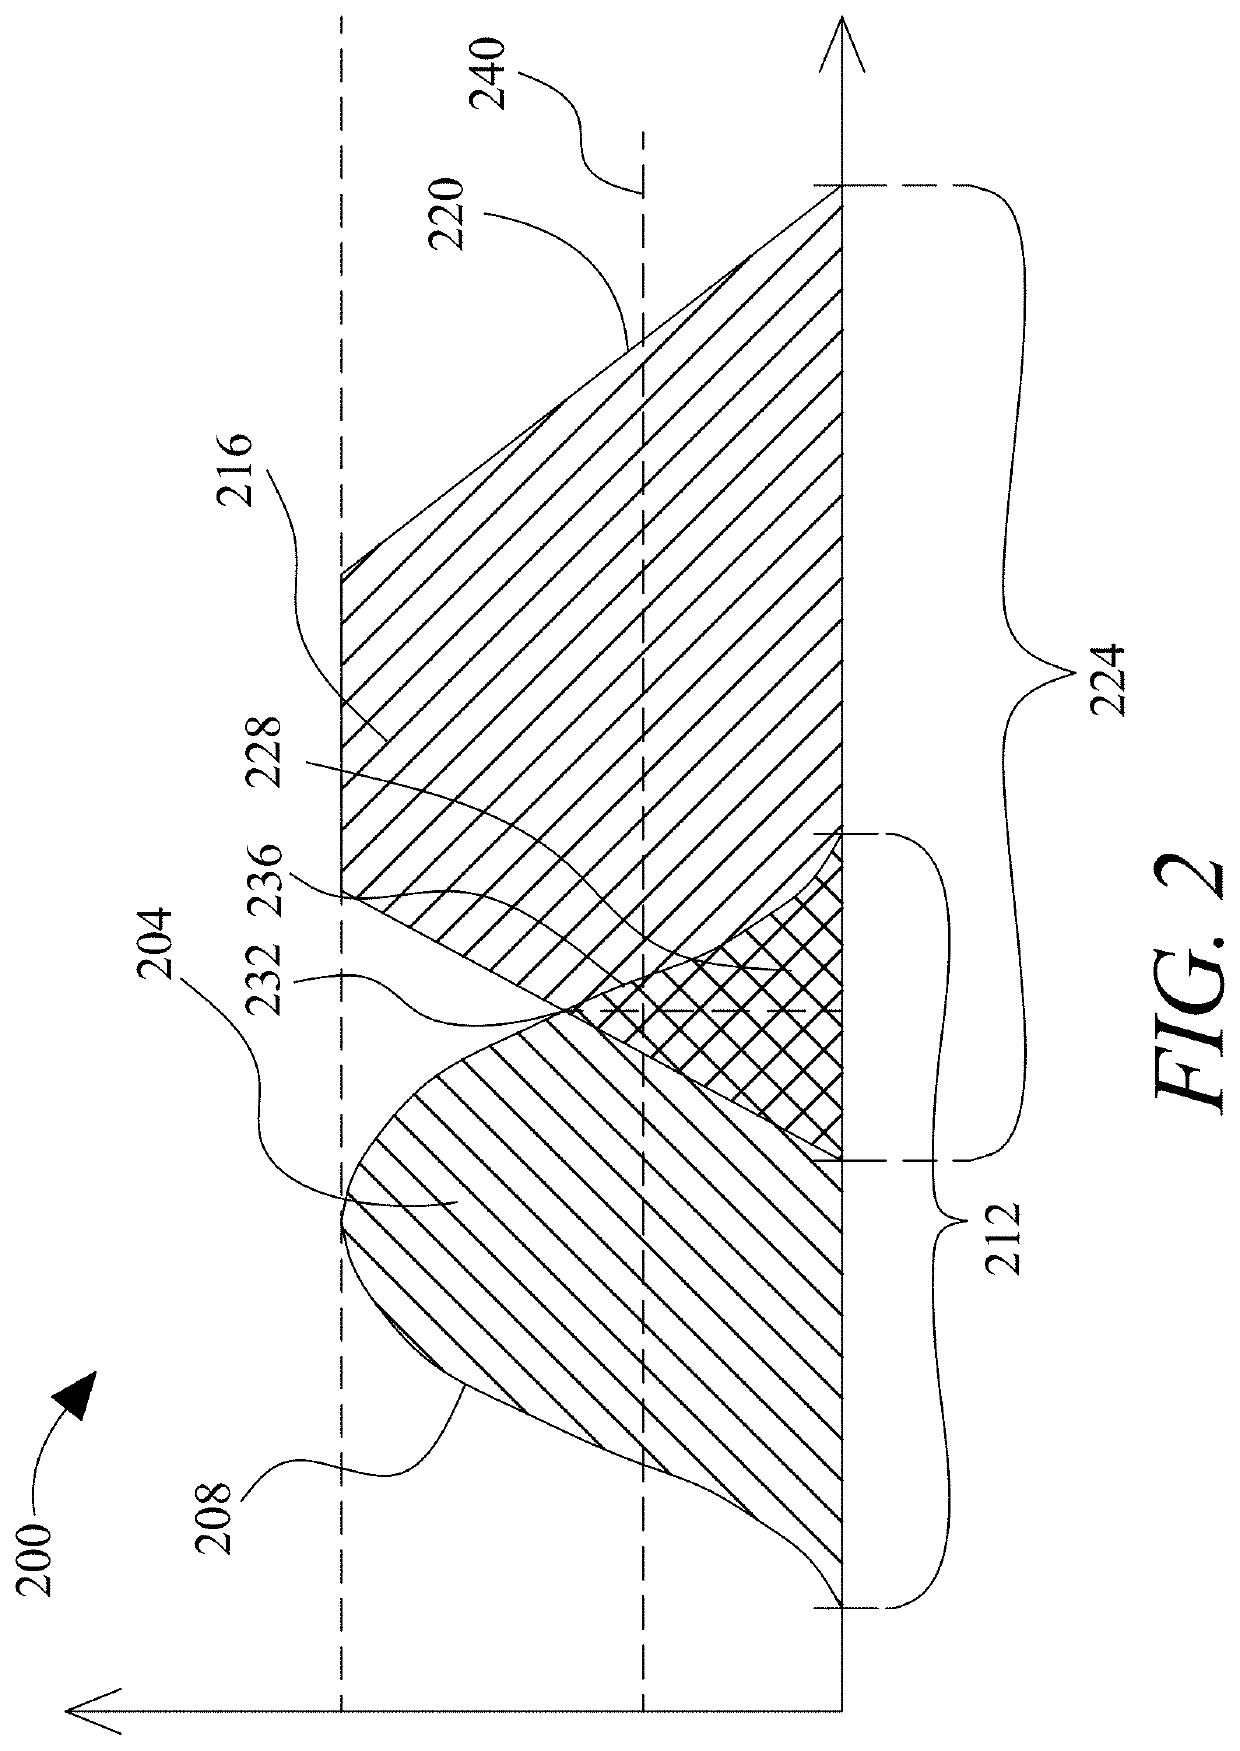 System for monitoring the landing zone of an electric vertical takeoff and landing aircraft